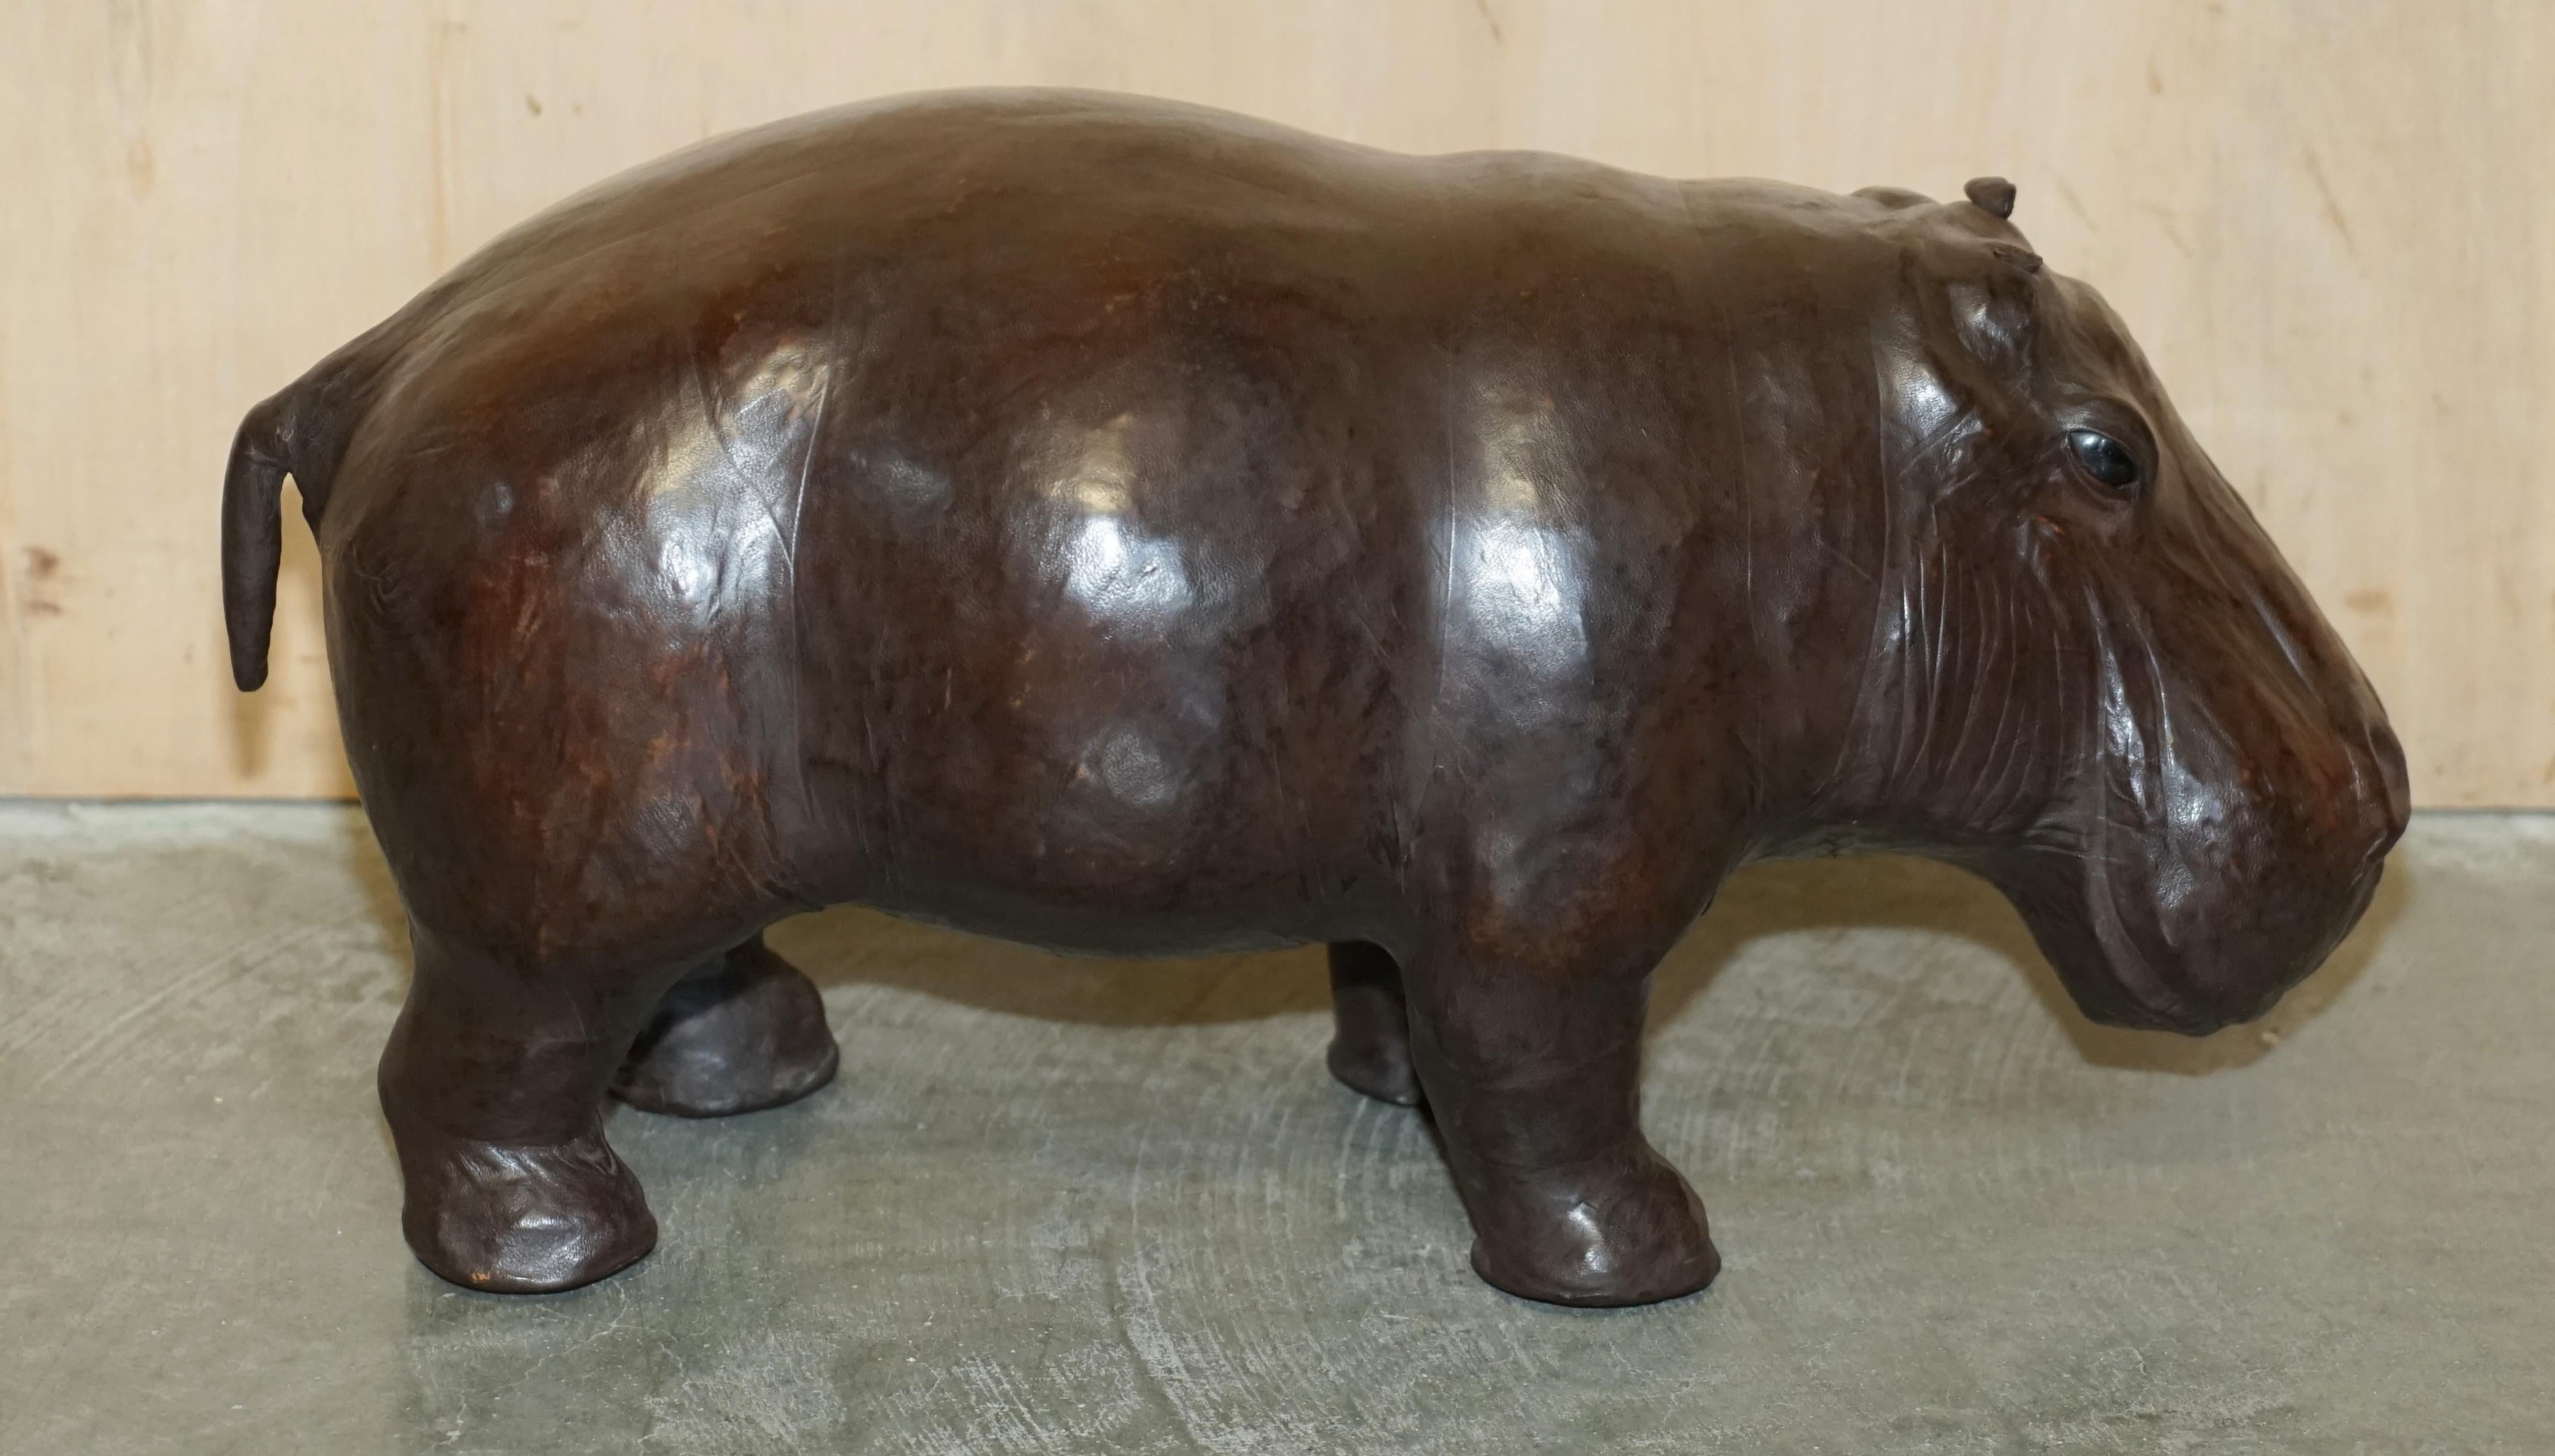 Royal House Antiques

Royal House Antiques is delighted to offer for sale this absolutely sublime very rare and original 1930’s Liberty’s London Omersa brown leather land dyed Hippo stool or footstool with original glass eyes

Please note the